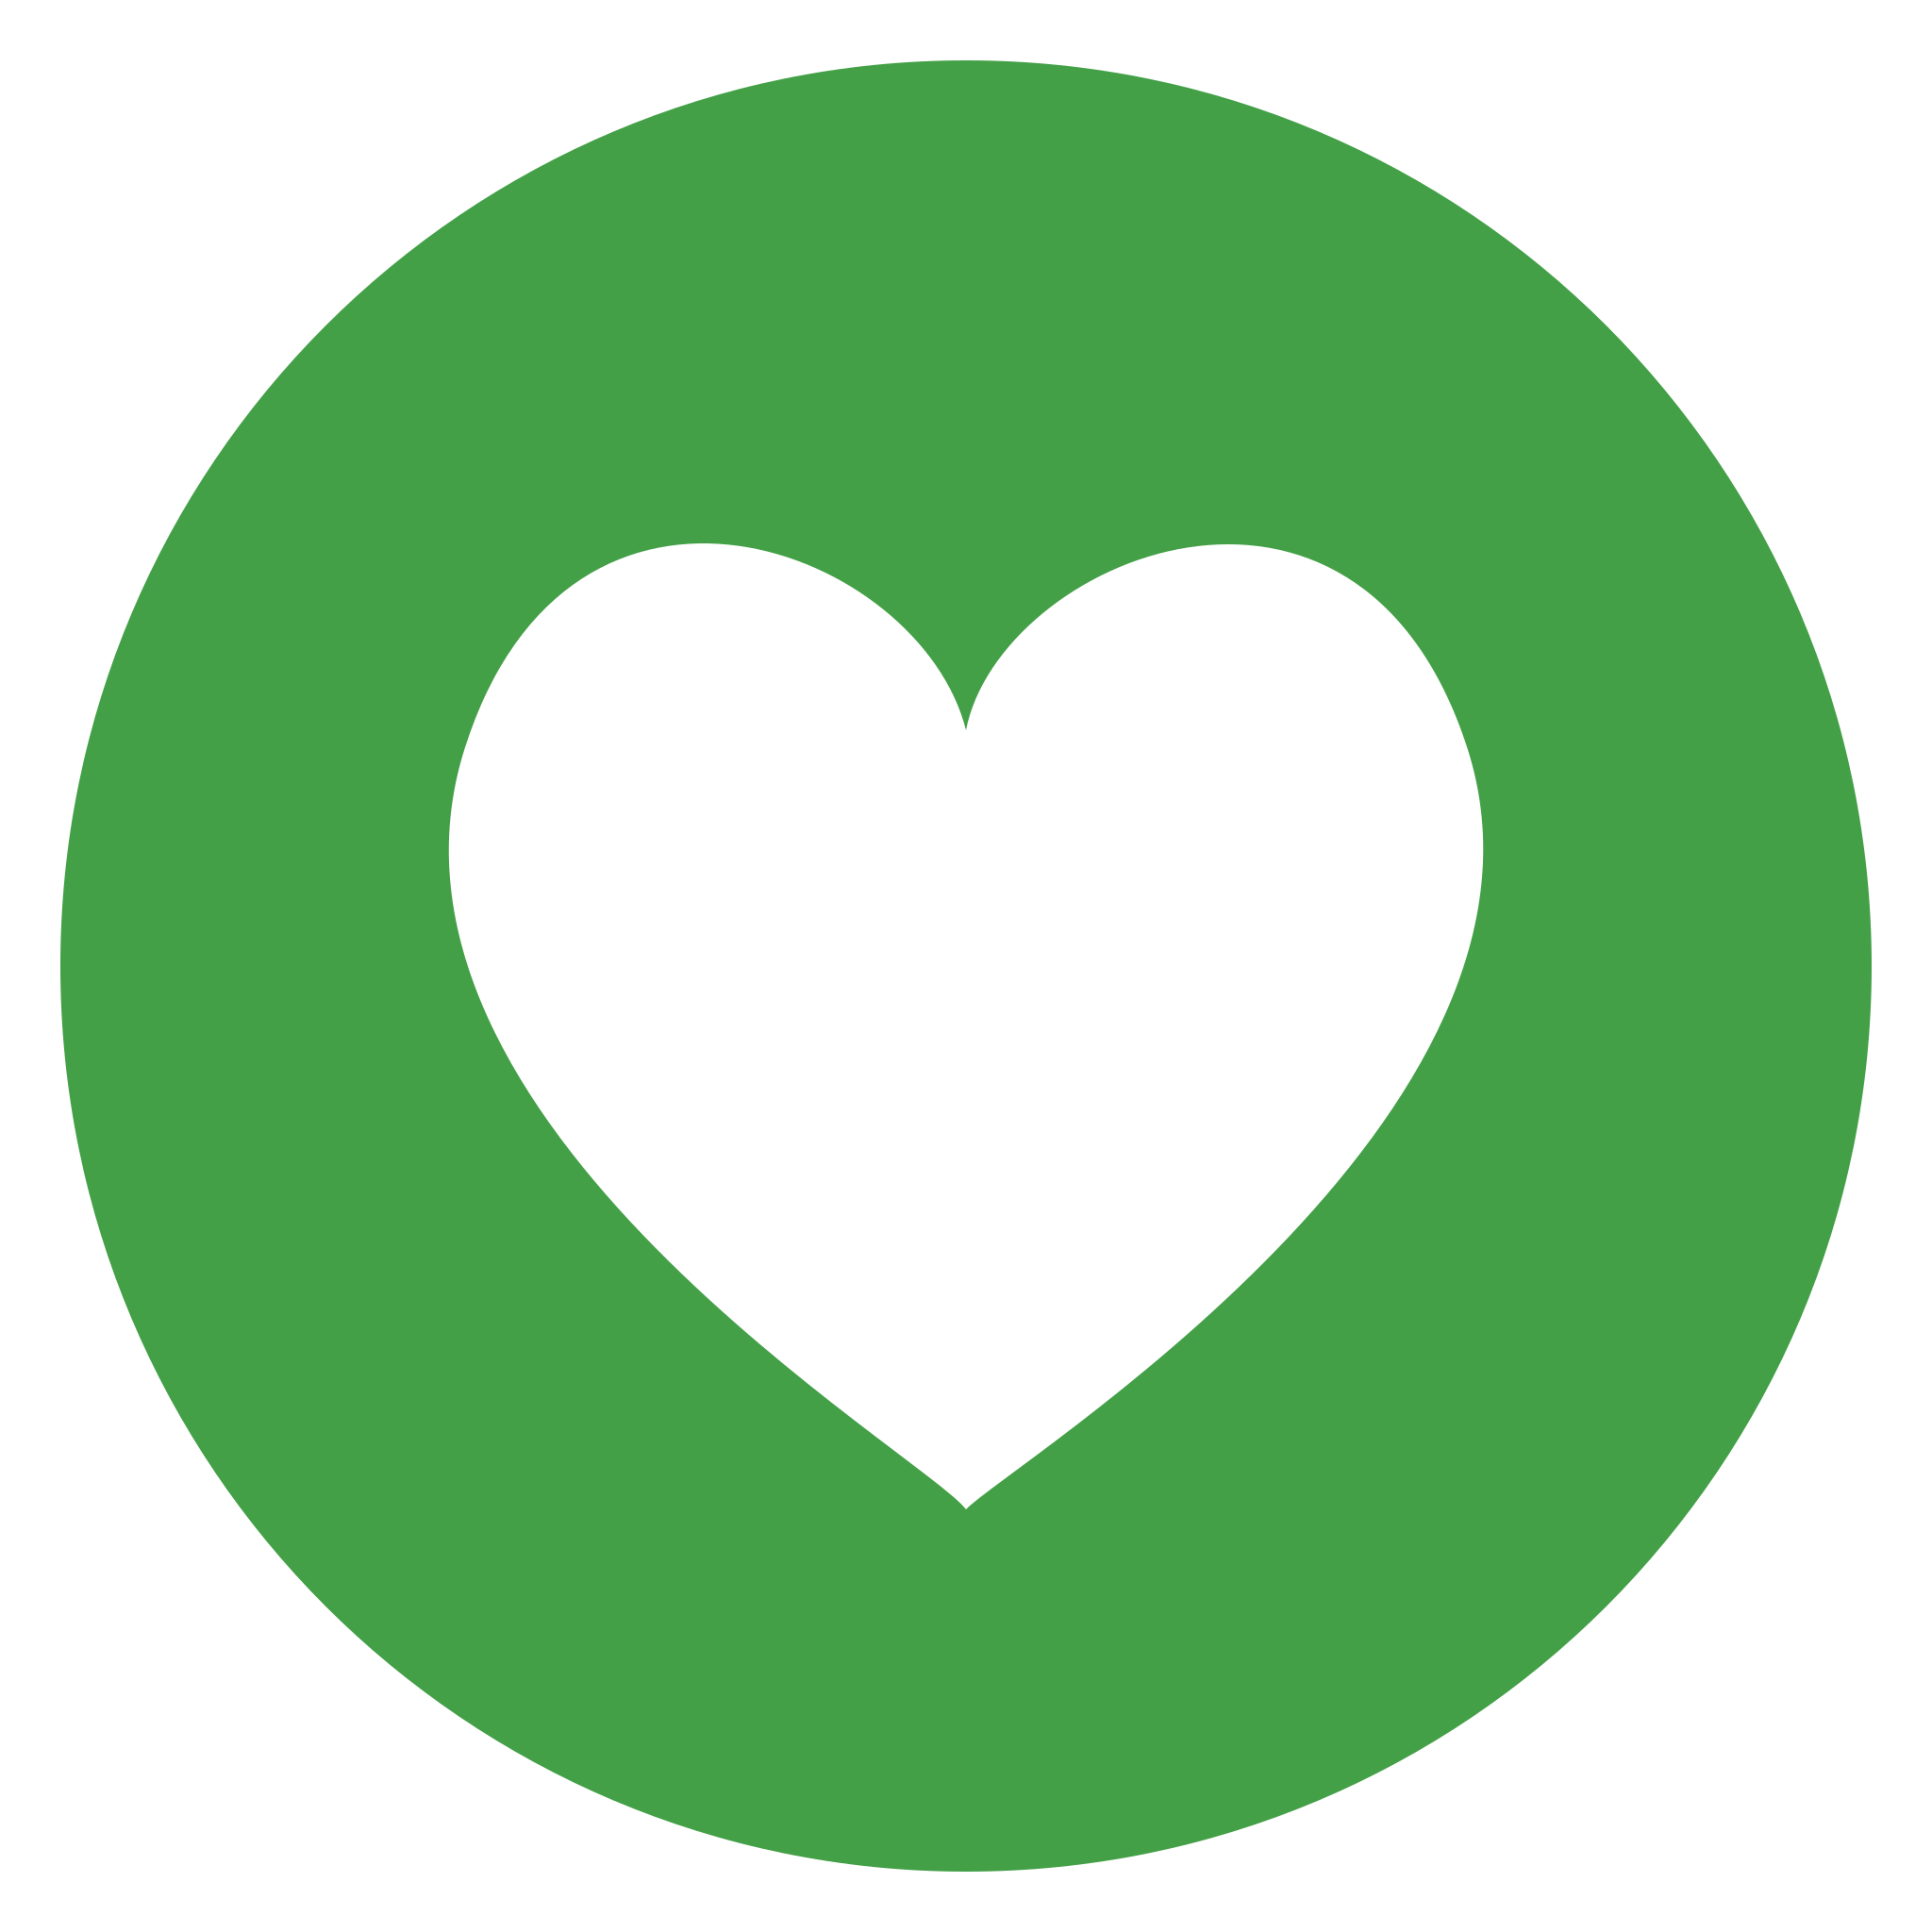 Green Heart PNG Image